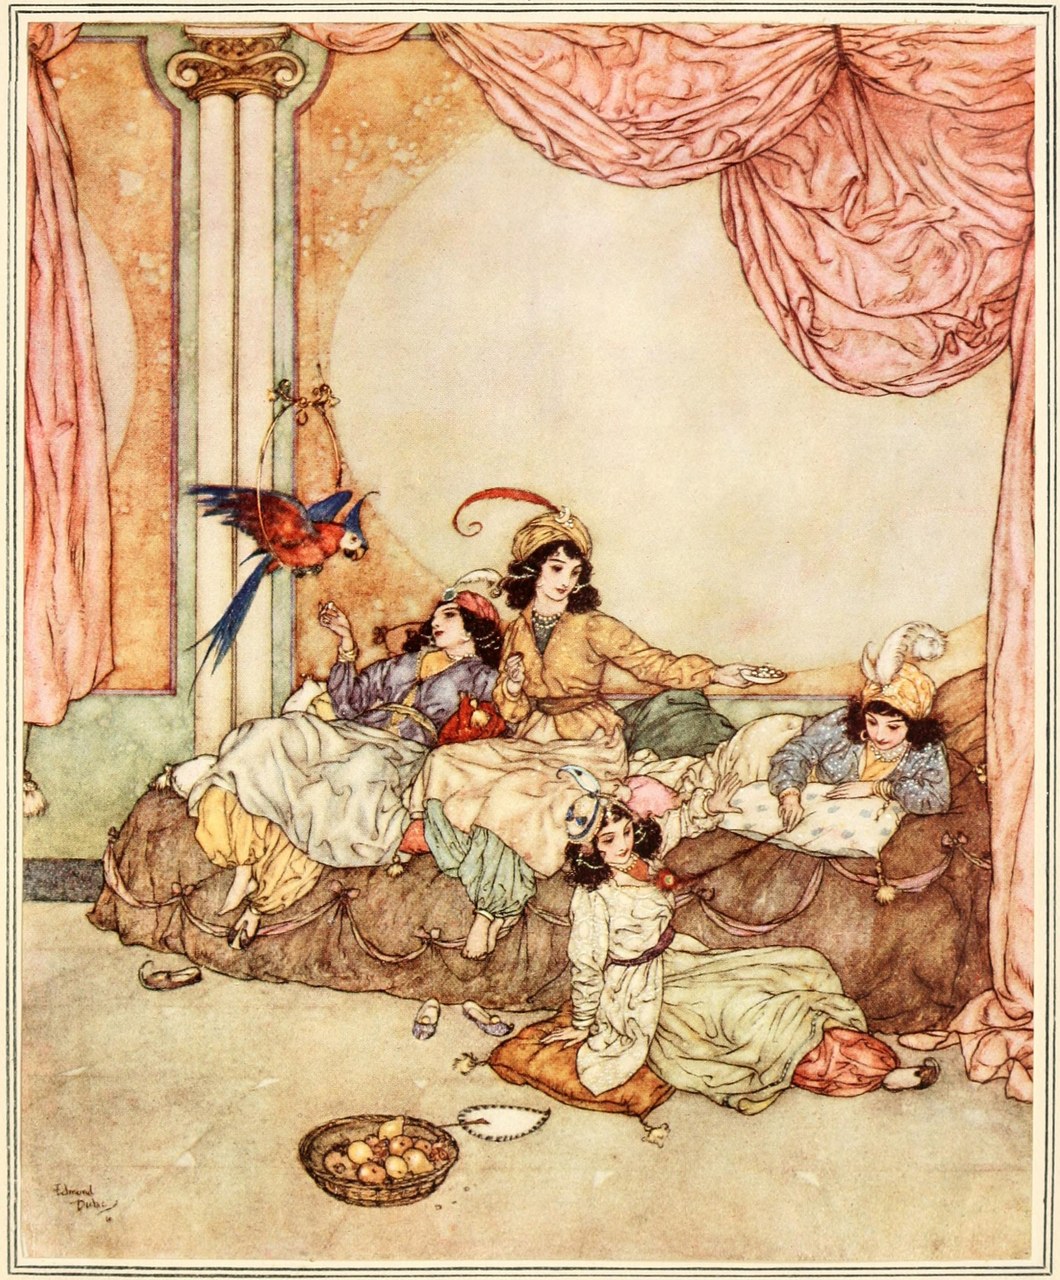  Arthur Quiller-Couch, The Sleeping Beauty and Other Fairy Tales From the Old French, illustrato da Edmund Dulac, 1910 (Wikimedia Commons)